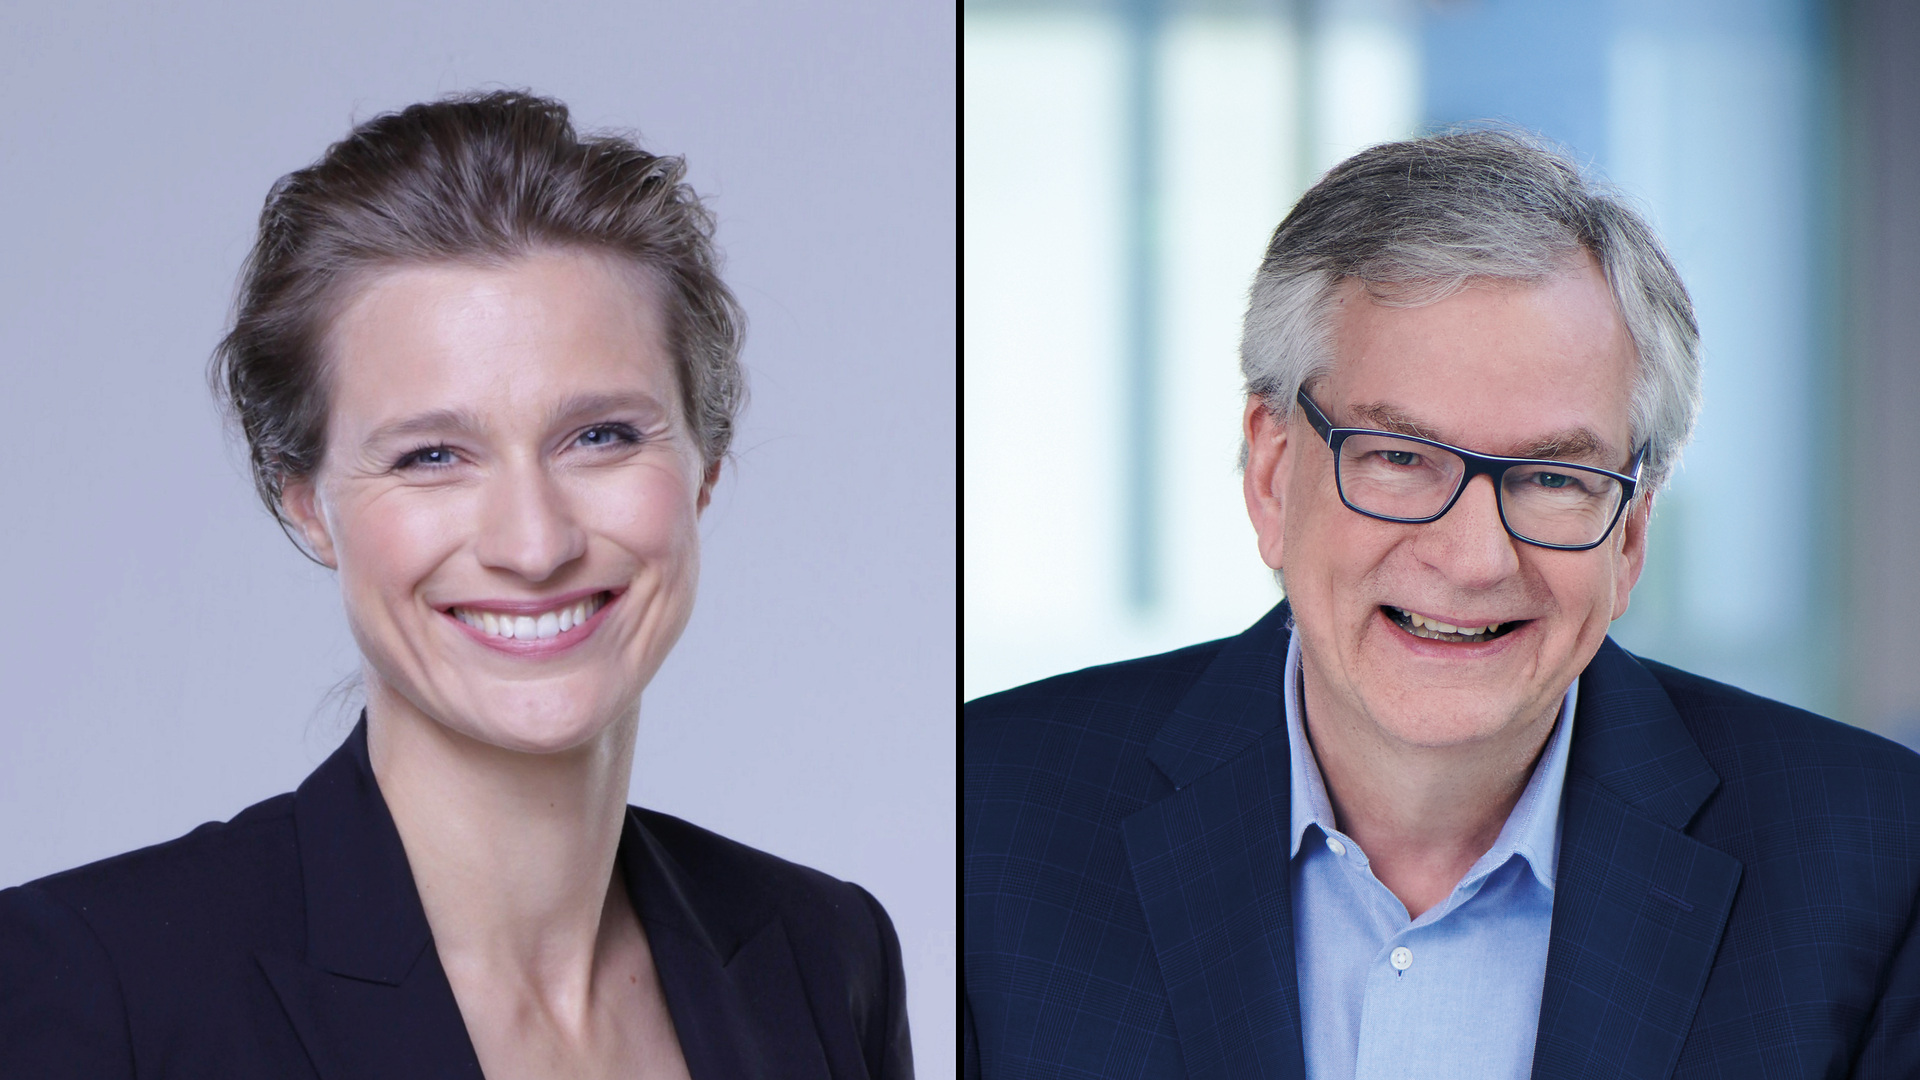 Britta Heidemann and Martin Daum discuss motivation and competition in CEO podcast